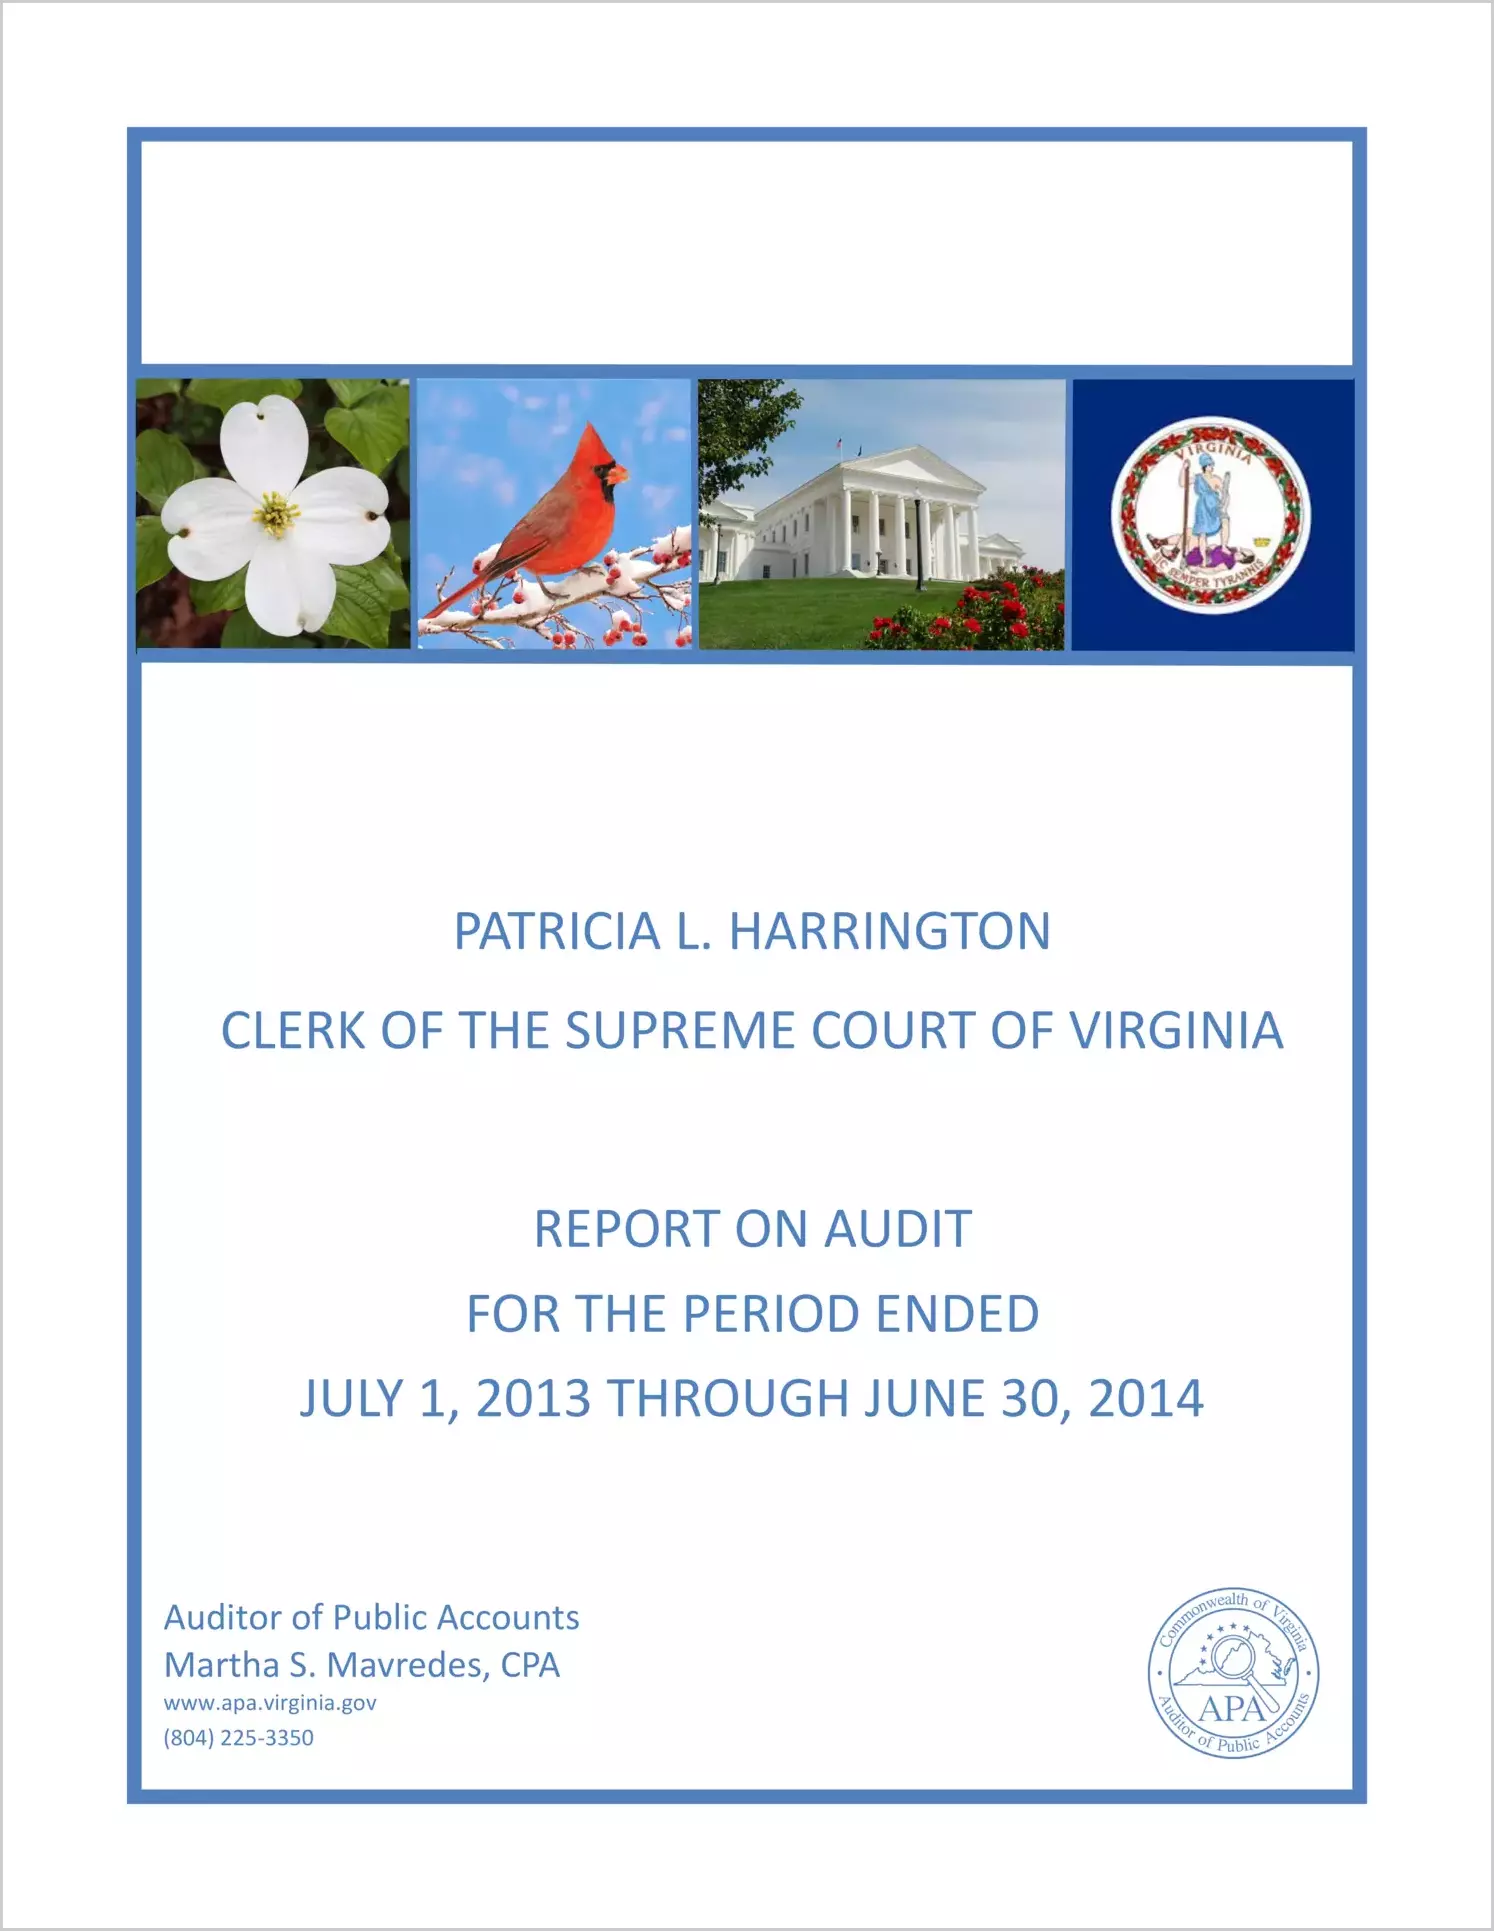 The Clerk of the Supreme Court of Virginia for the period July 1, 2013 thorugh June 30, 2014